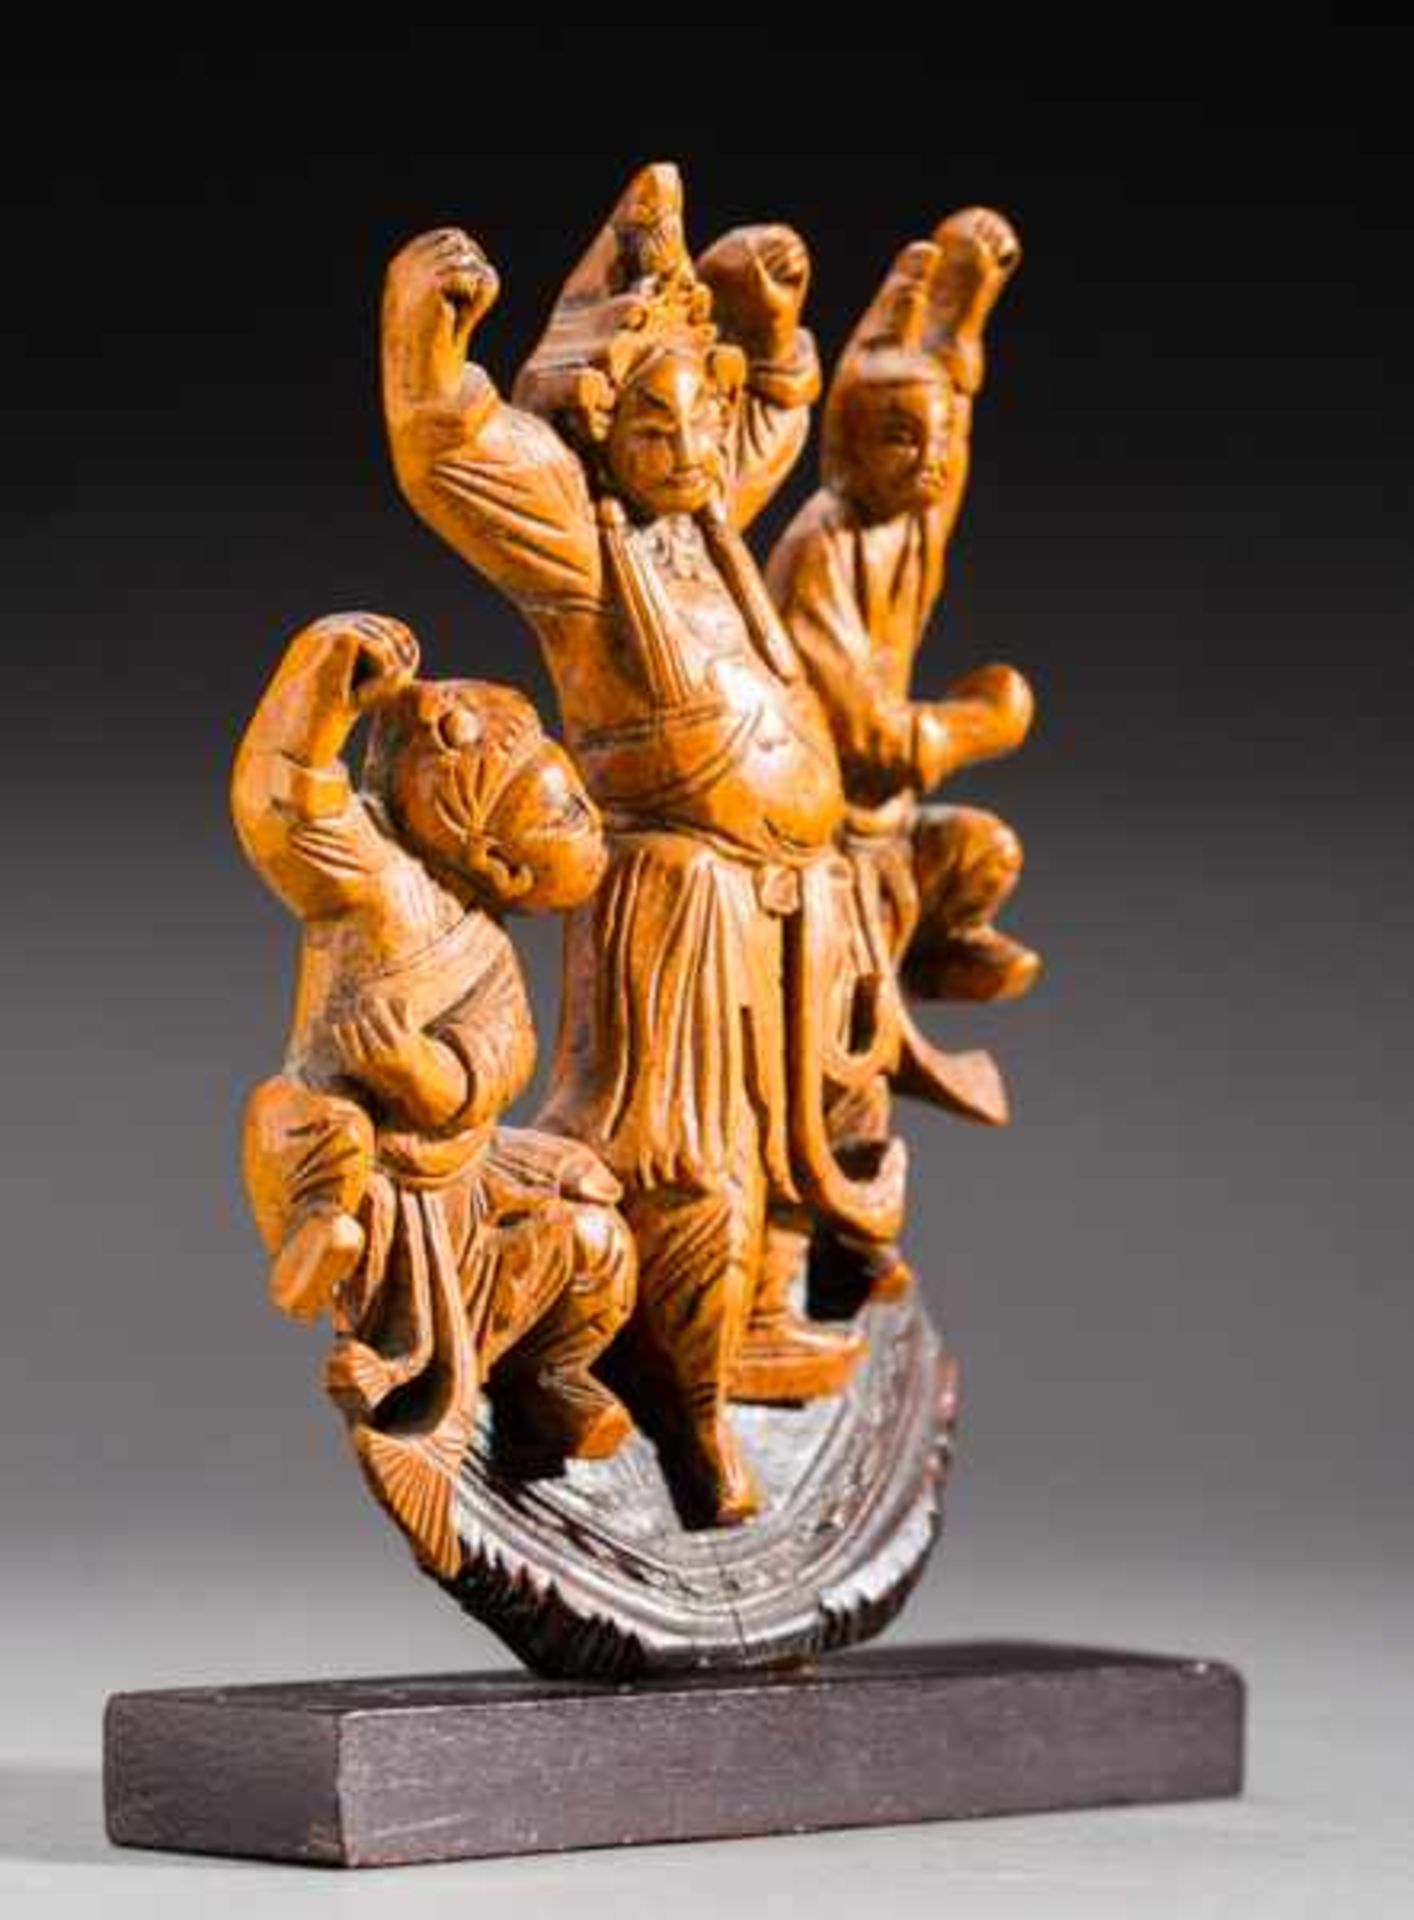 CHINESE THEATER SCENE Wood. China, 19th to early 20th cent.Three dancing figures, dressed in - Image 2 of 4